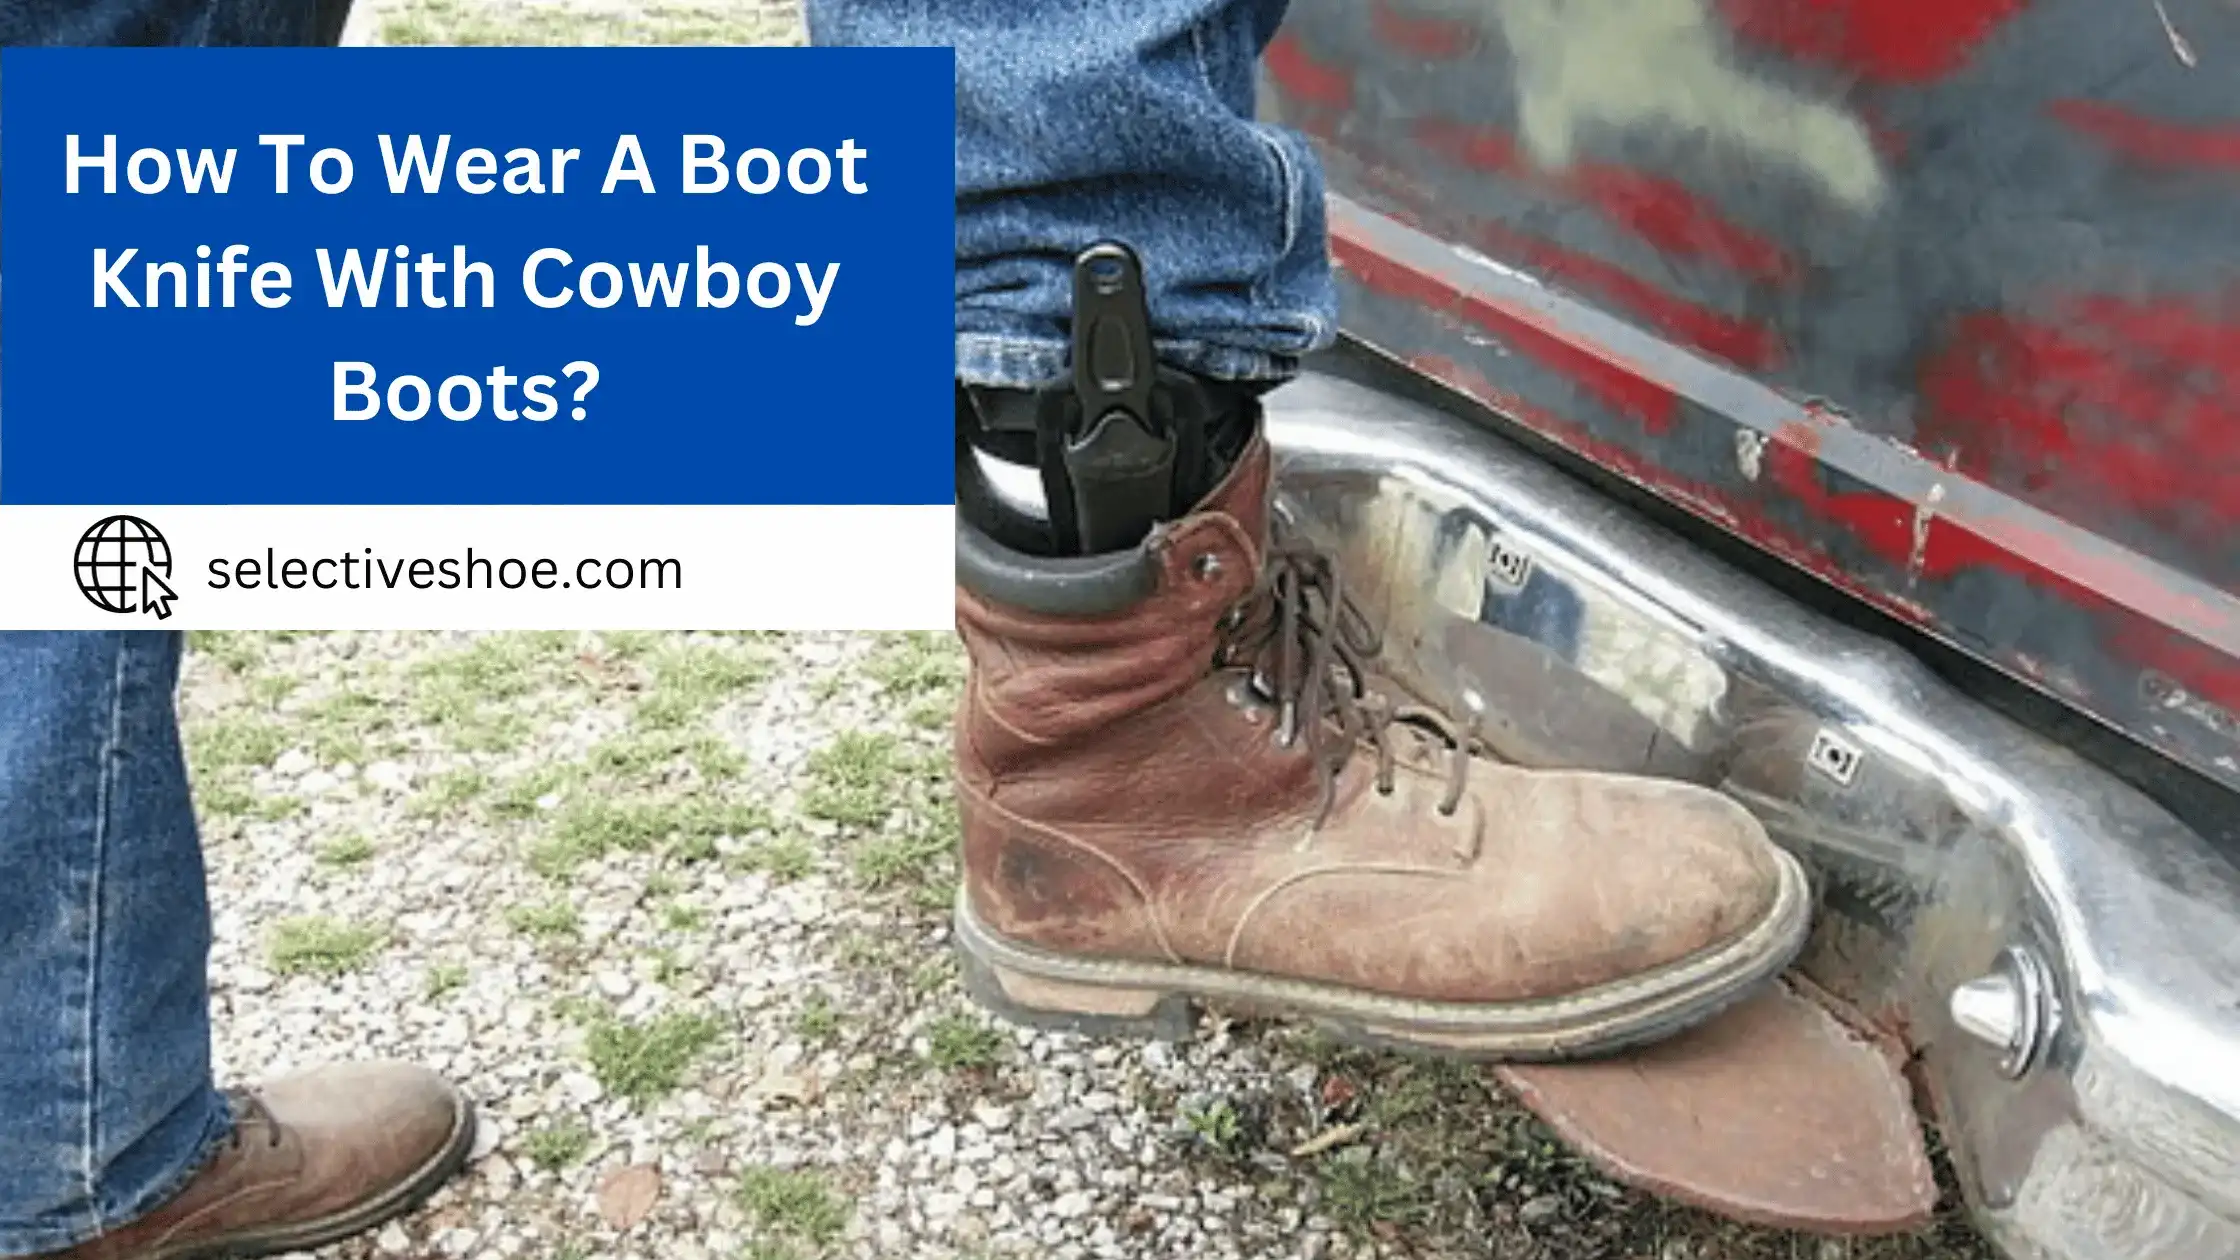 How To Wear A Boot Knife With Cowboy Boots? Quick Solutions!